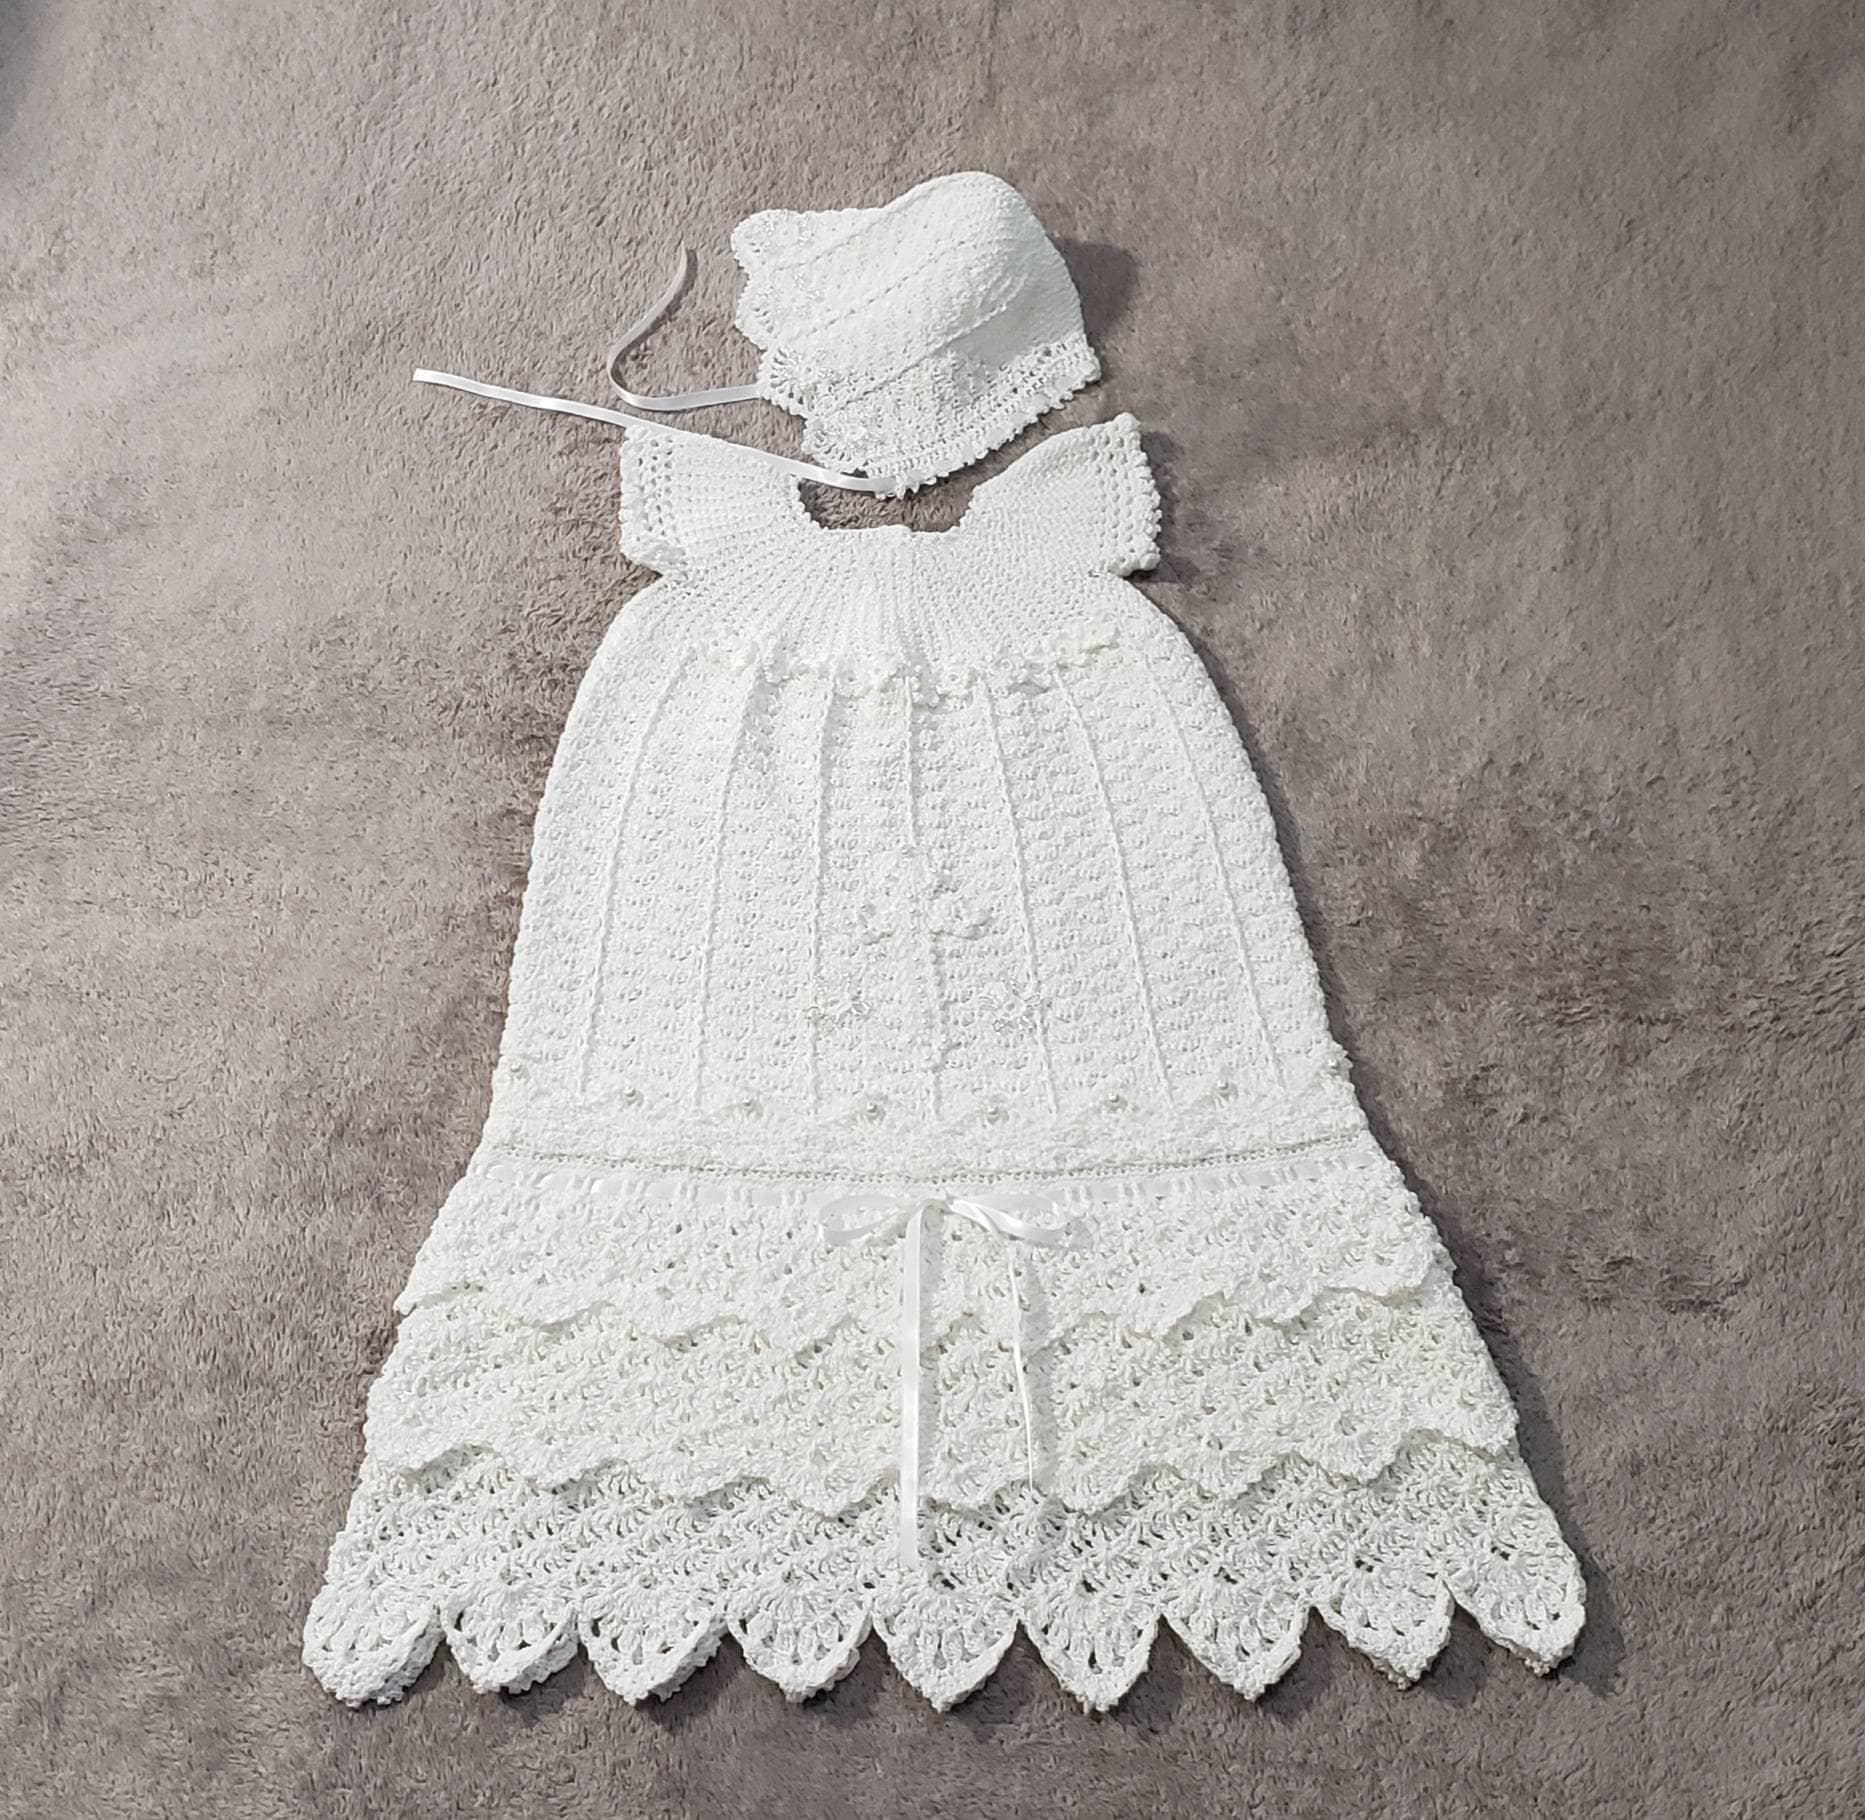 Raveled Cables Christening Gown - Judy's Knitting Page